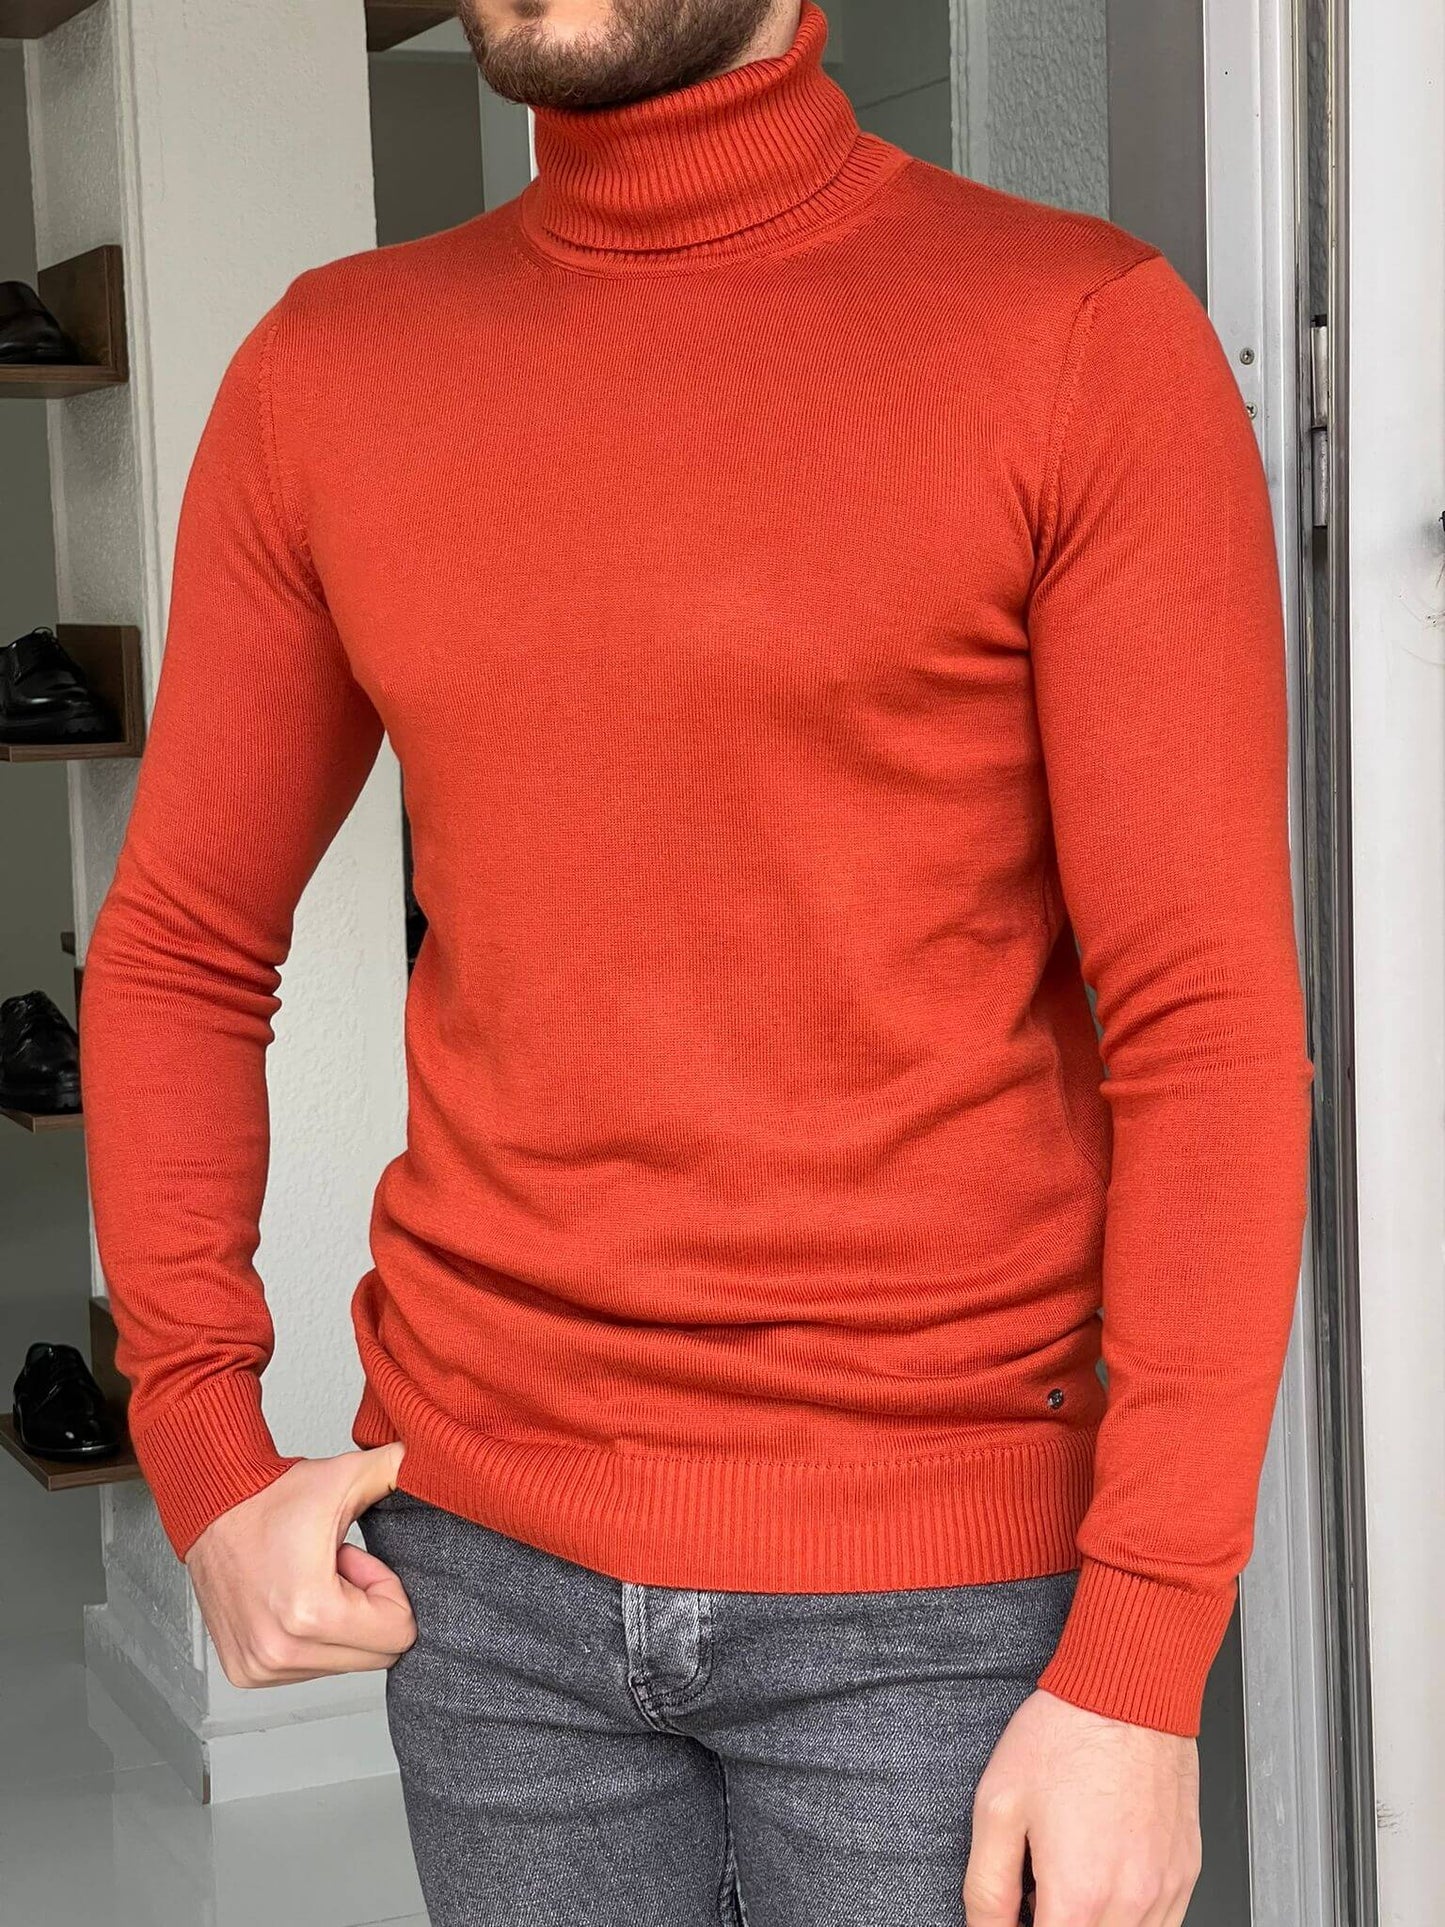 An orange turtleneck sweater, featuring a ribbed knit texture and a cozy, high neckline.